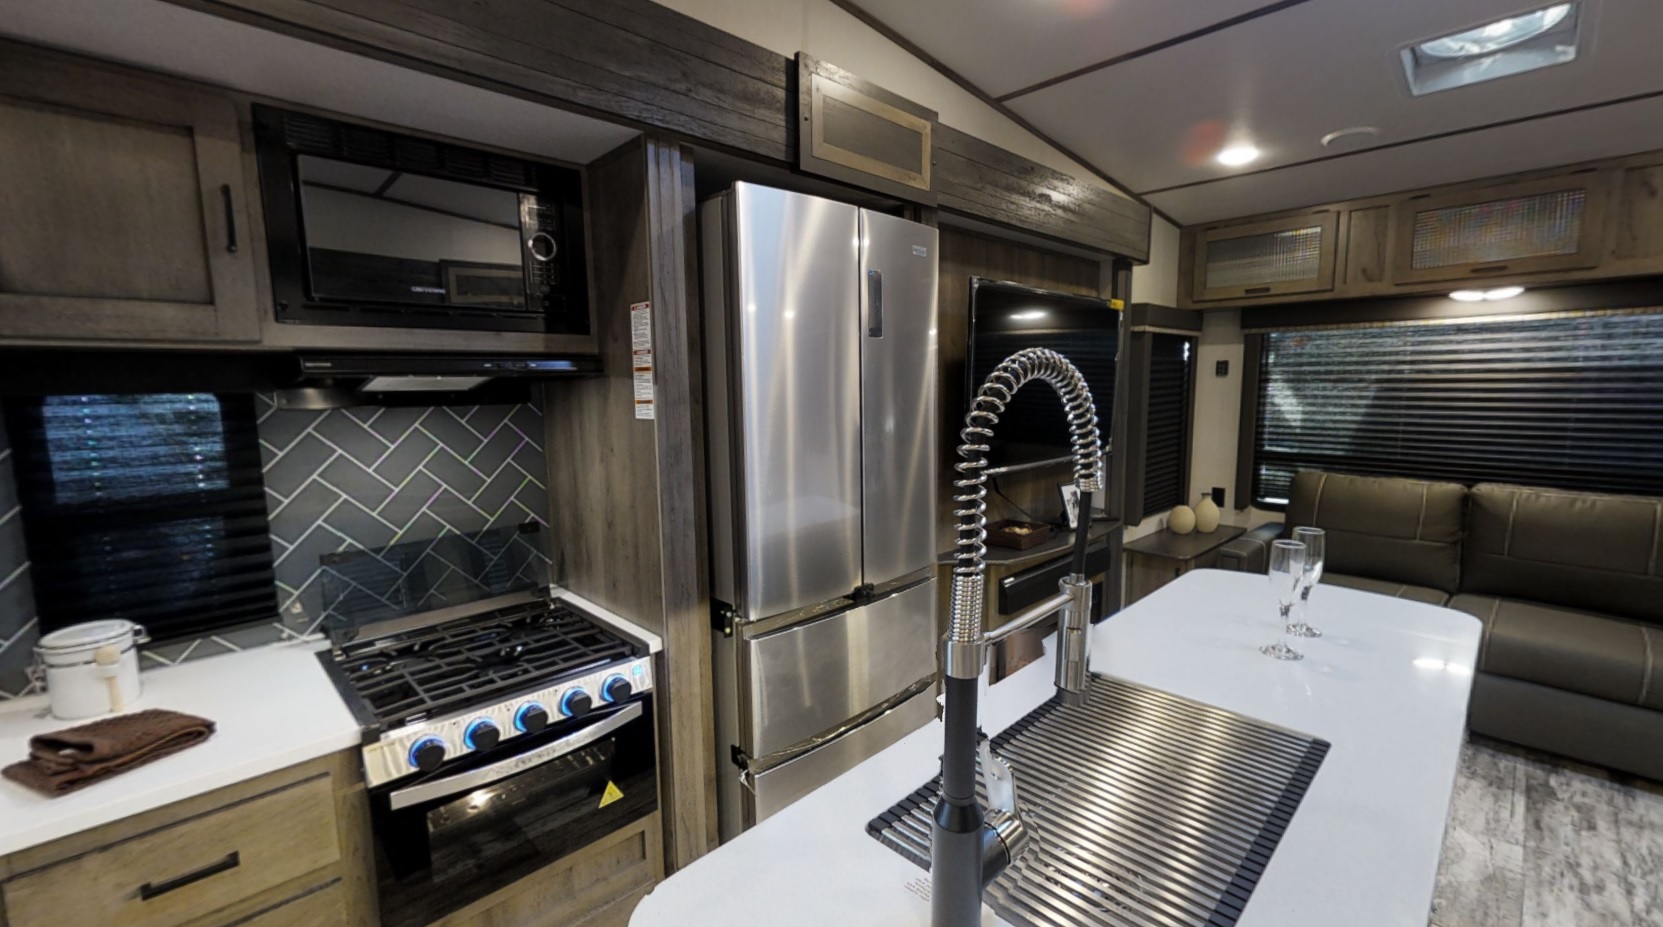 Two Bedroom 5th Wheel With Loft Byerly Rv, Fifth Wheel With Bunk Beds And Outdoor Kitchen